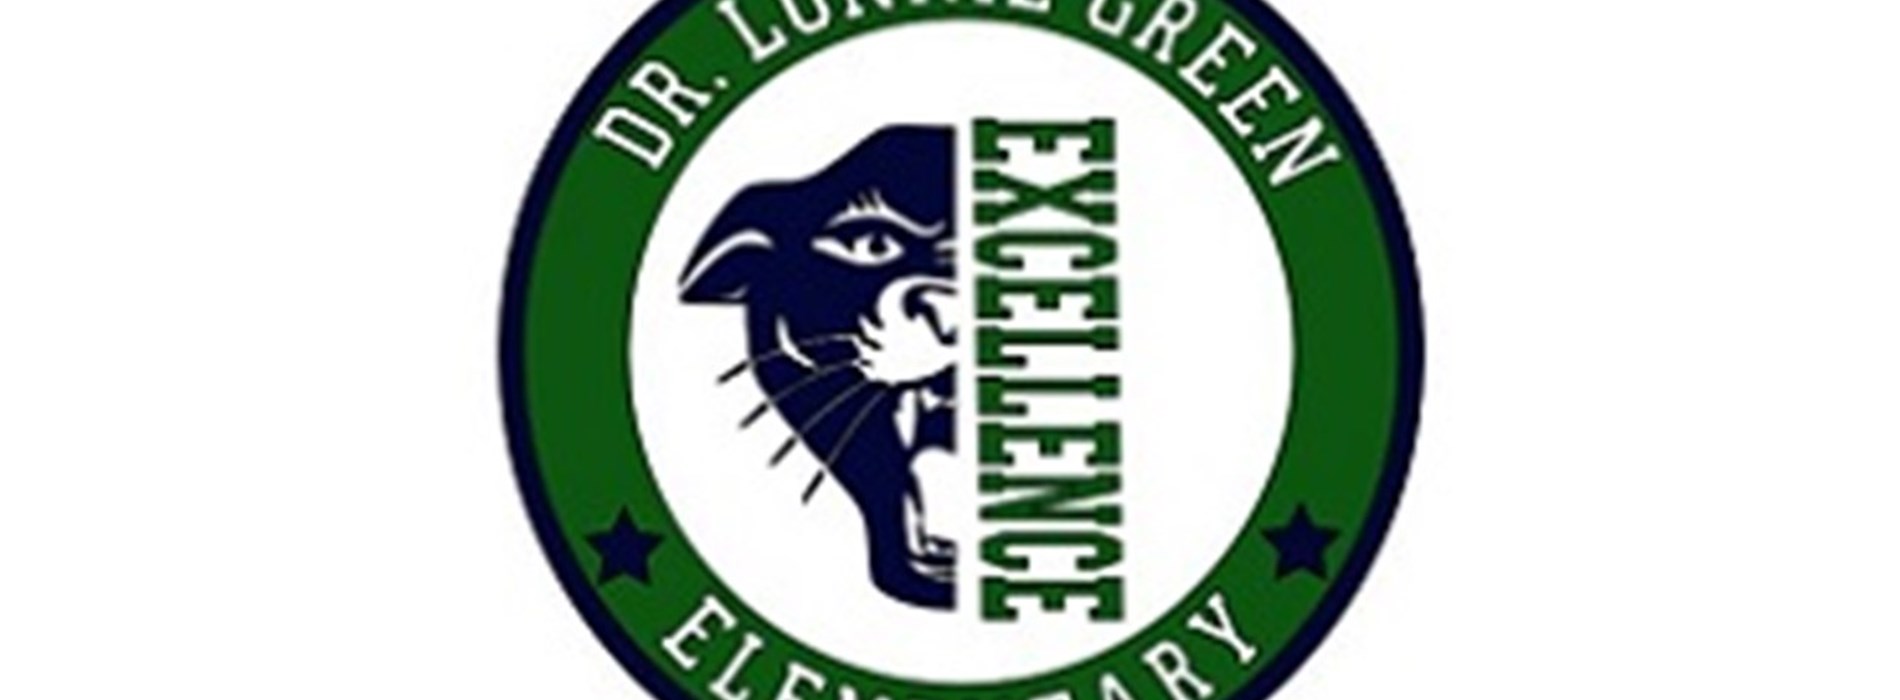 Dr. Lonnie Green banner Image